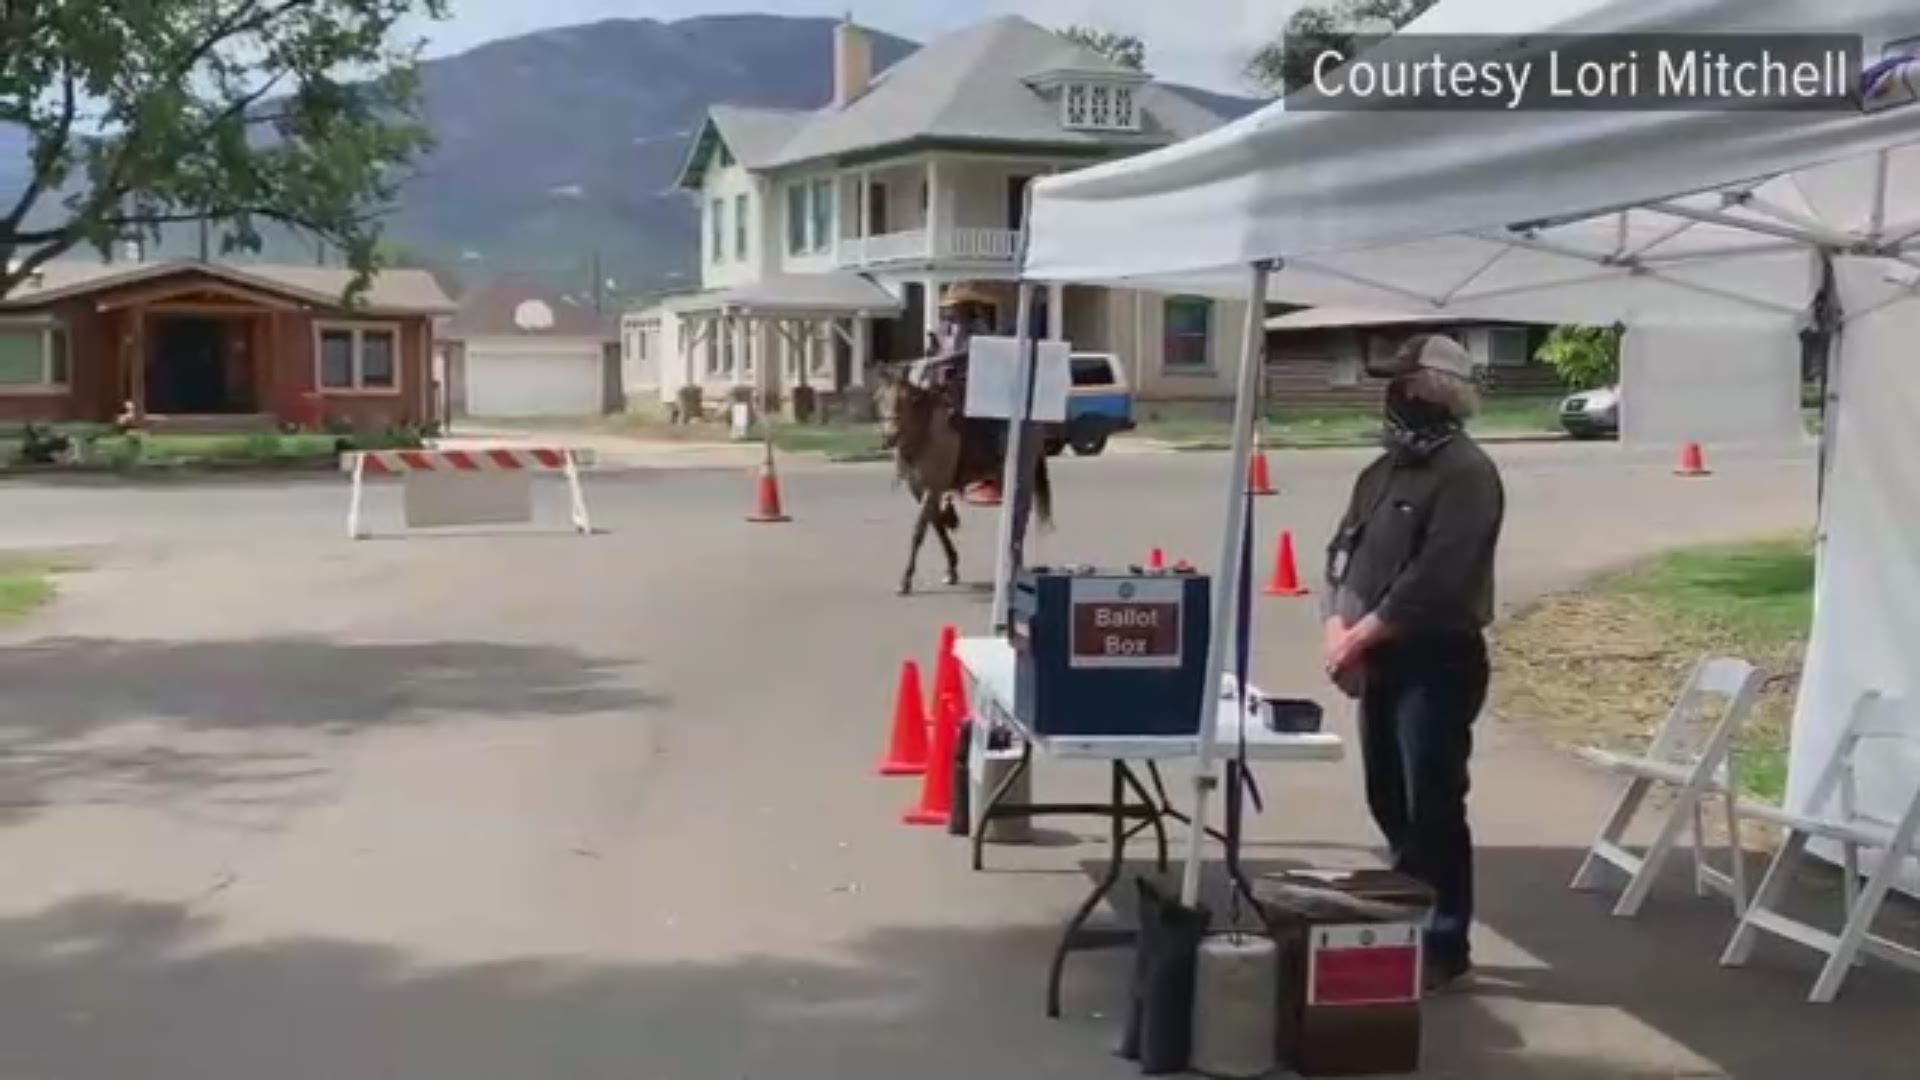 Chaffee County Clerk Lori Mitchell said the state asked for drive-through voting. Her mountain community said "hold my beer" and the results are incredible.